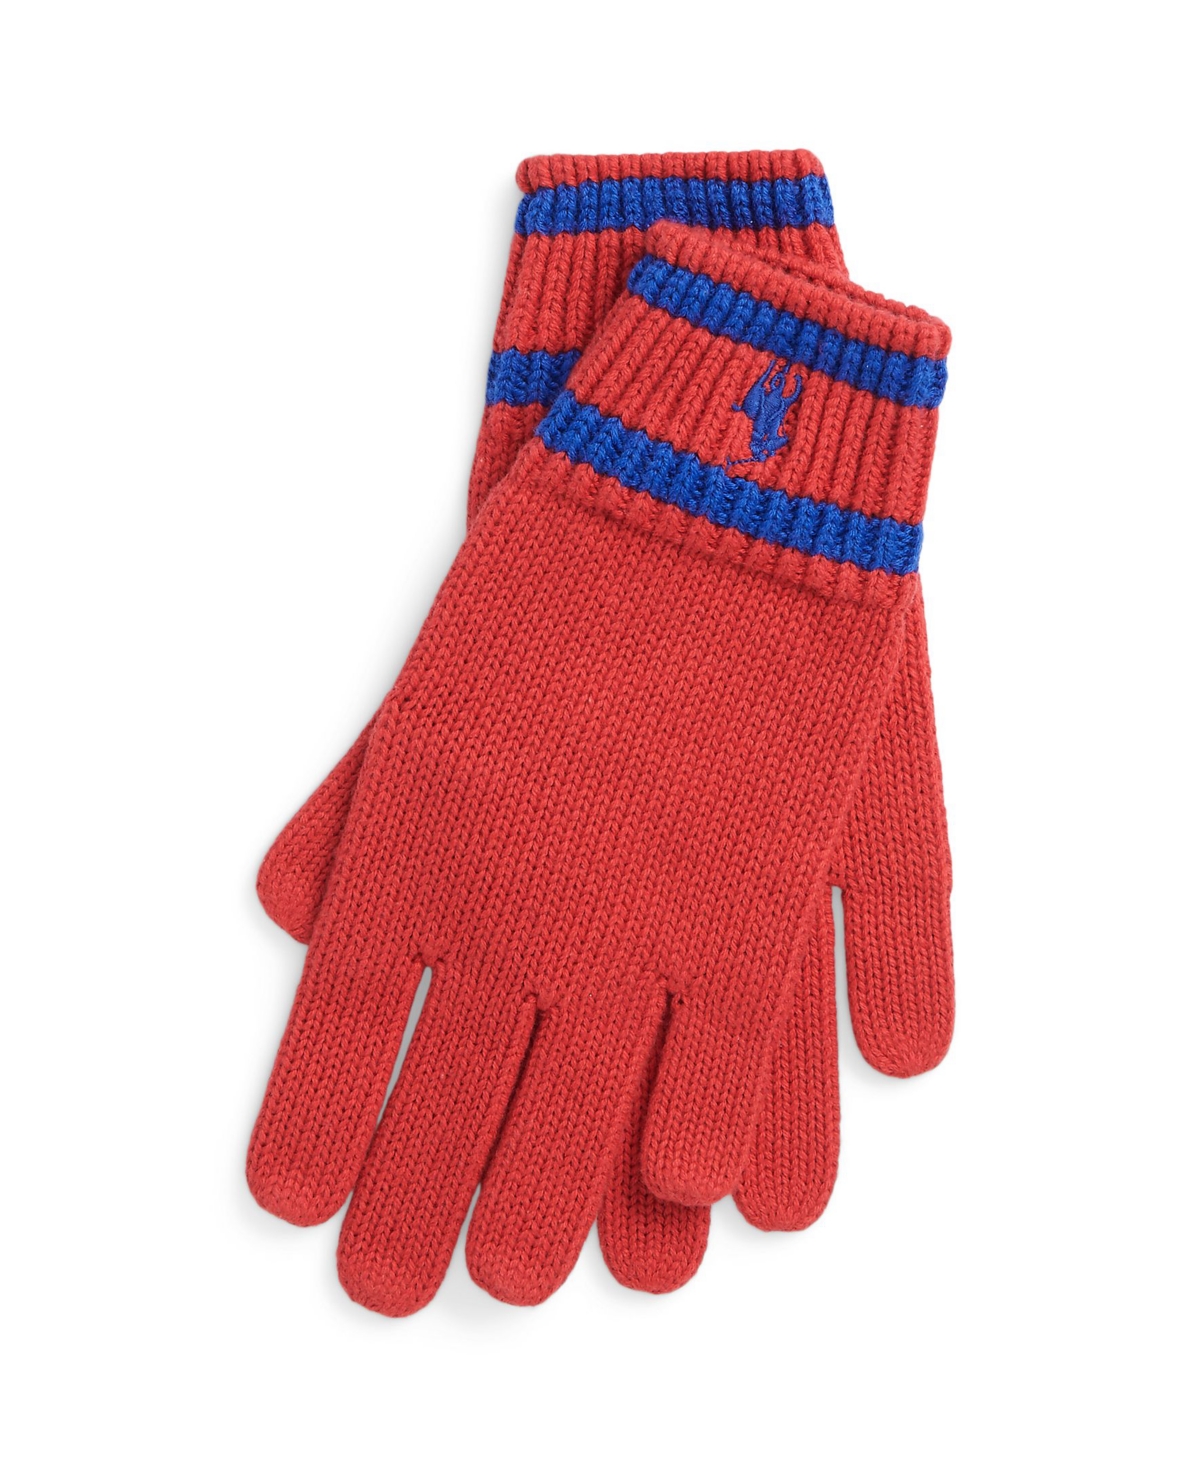 Polo Ralph Lauren Kids' Big Boys Striped Cotton Glove In Rl Red,heritage Royal